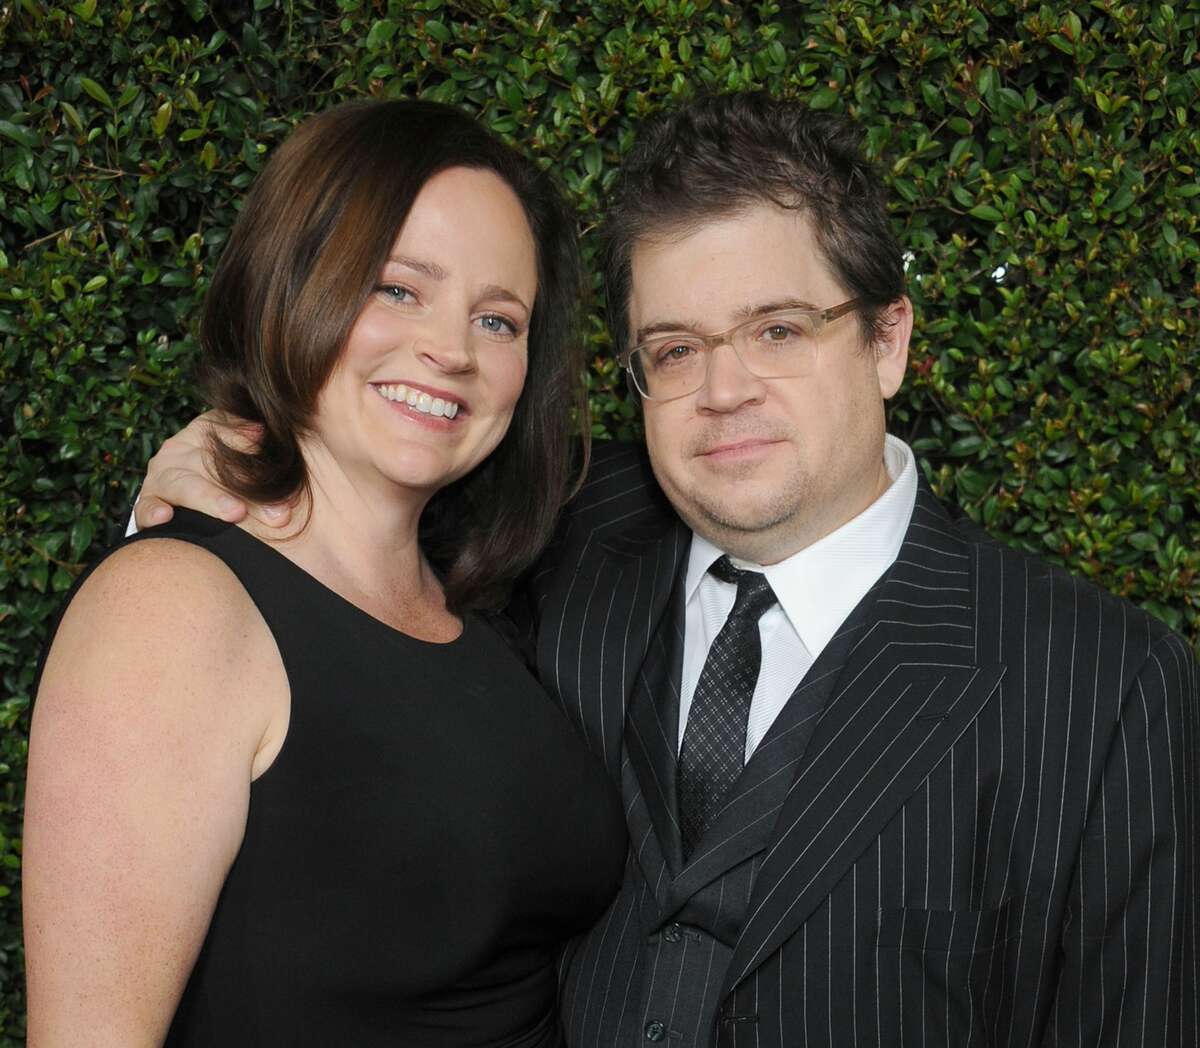 Author Michelle McNamara and her husband actor Patton Oswalt and wife arrive at the "Young Adult" Los Angeles Premiere at AMPAS Samuel Goldwyn Theater on December 15, 2011 in Beverly Hills, California.